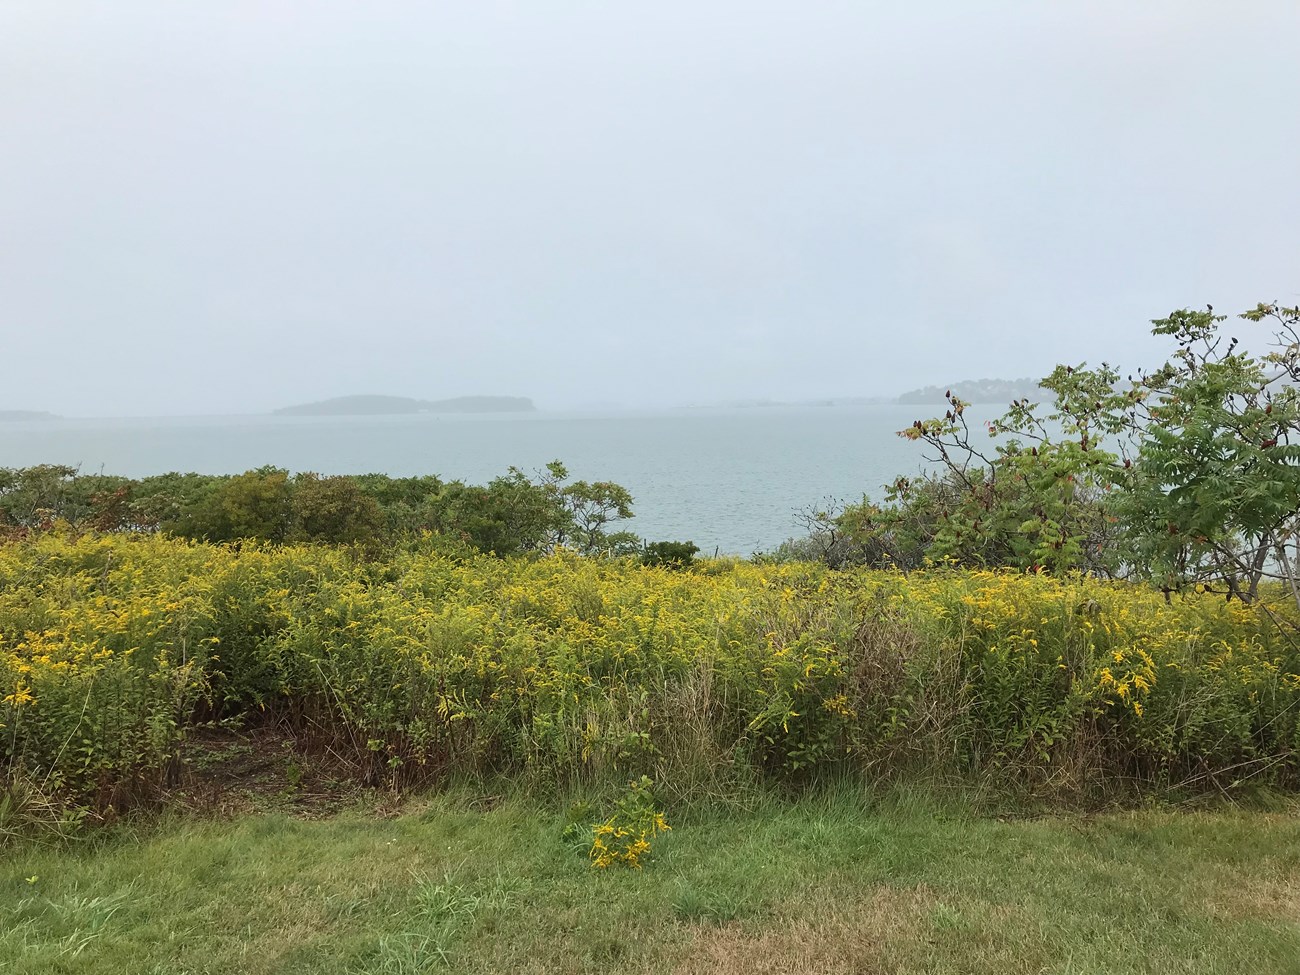 scenic landscape view of tall shrubs with yellow flowers overlooking a harbor